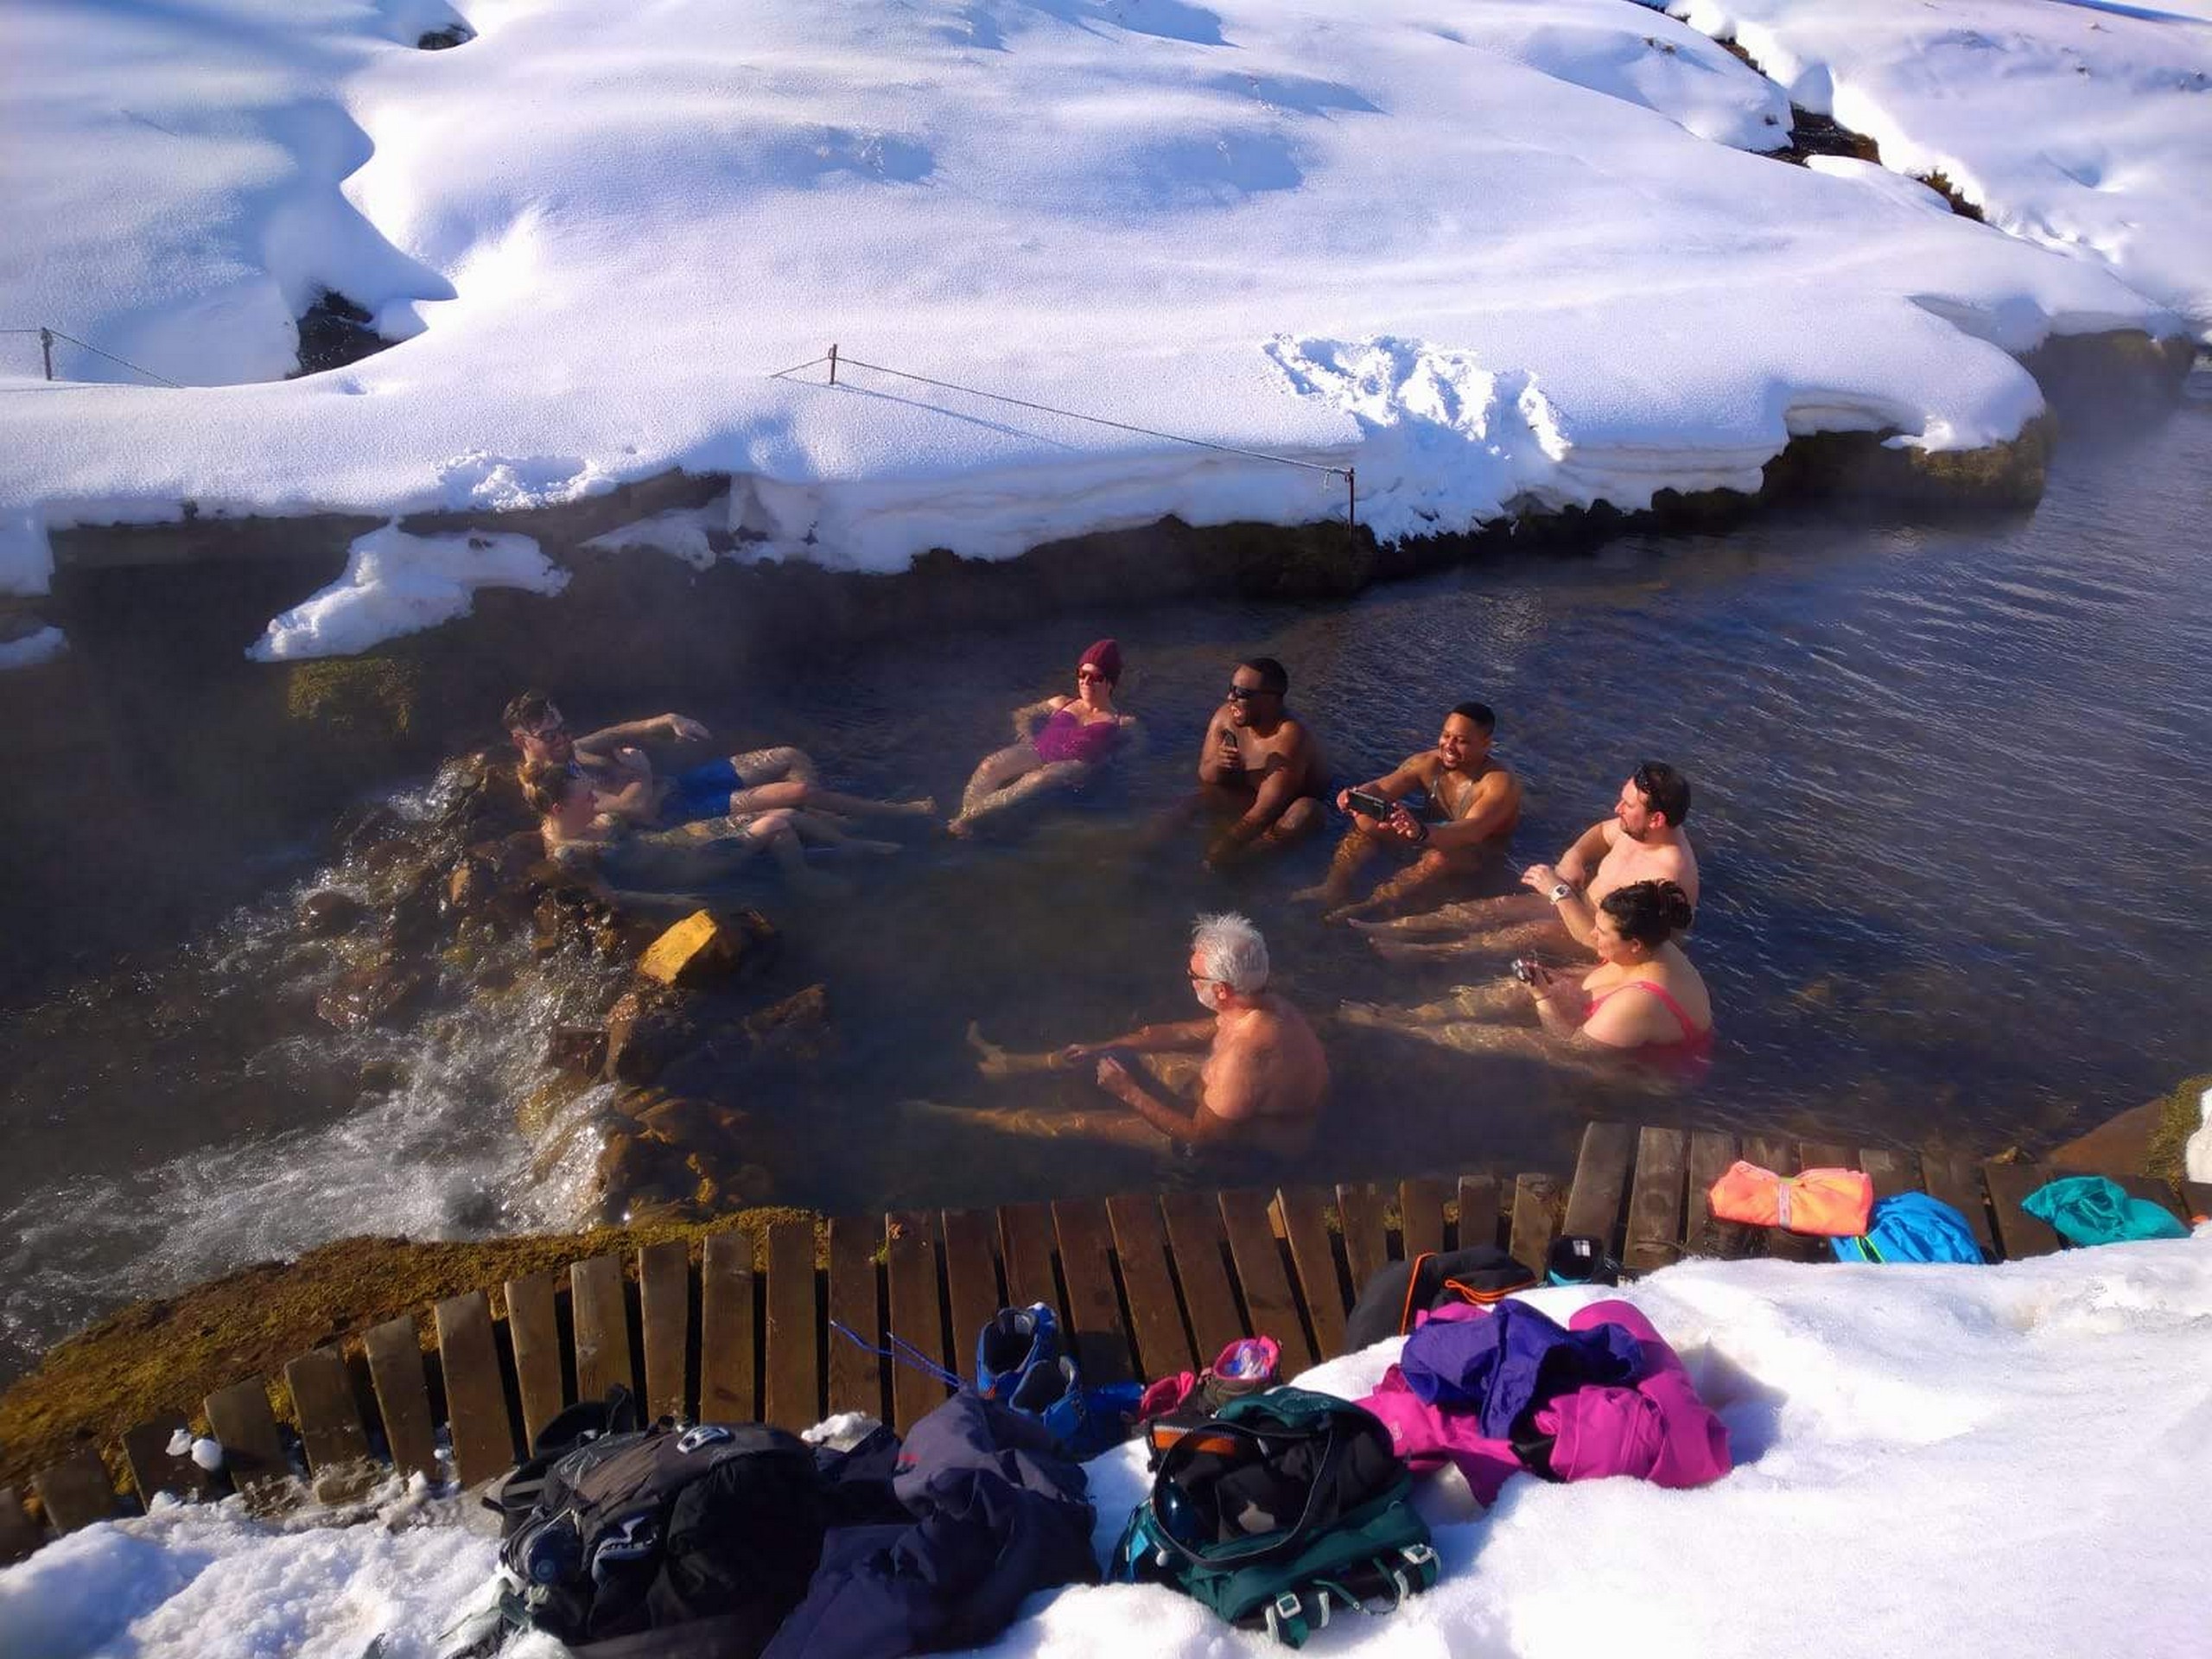 Enjoying the hot springs in Iceland after a long hike - Photo by Emelia Blöndal